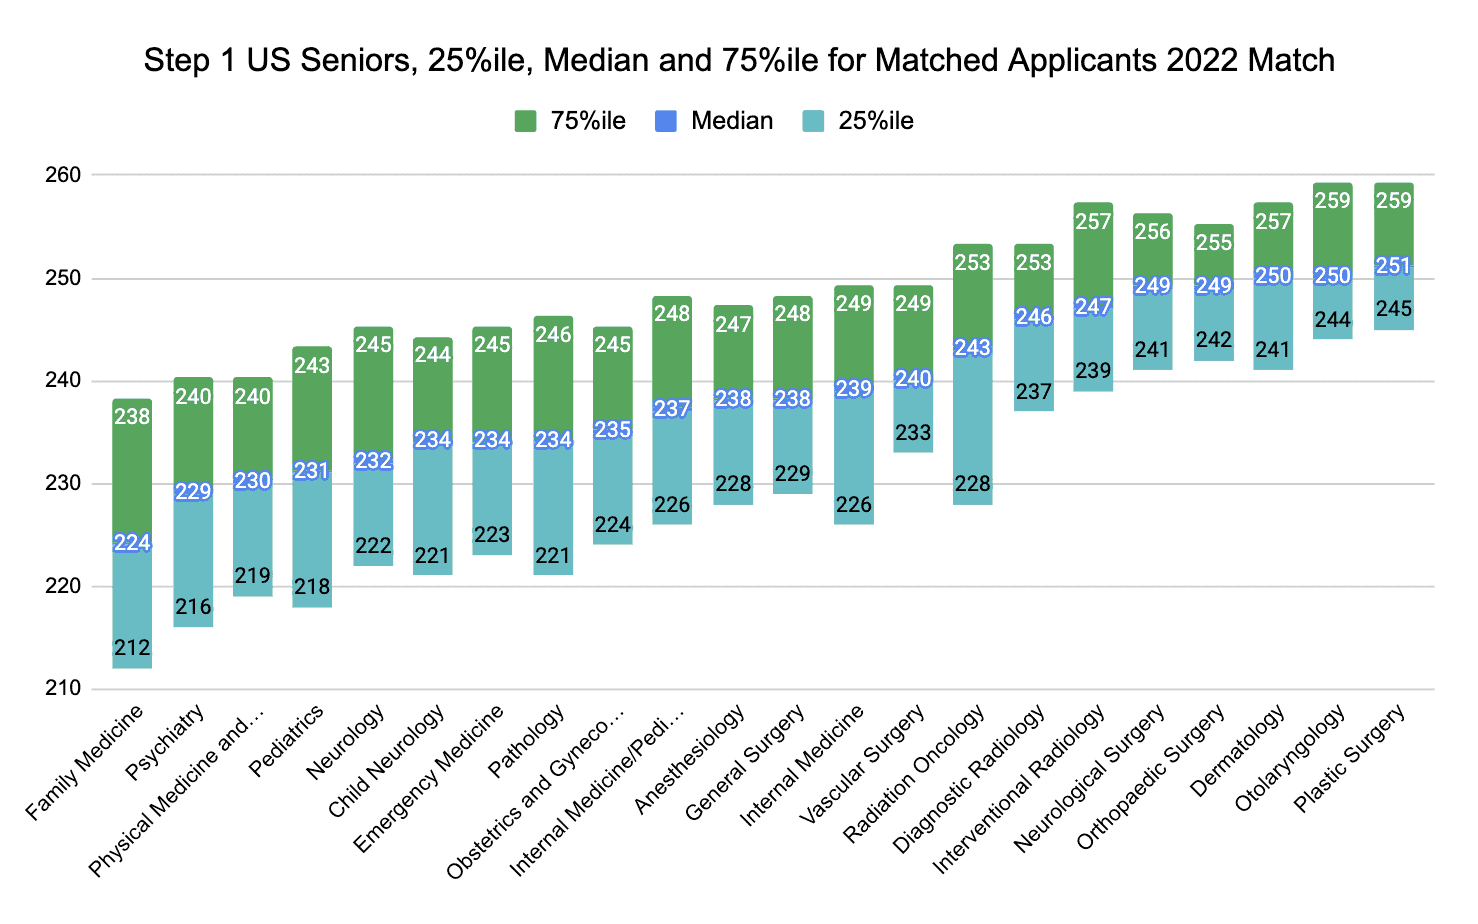 Step 1 US Seniors, 25%ile, Median and 75%ile for Matched Applicants 2022 Match